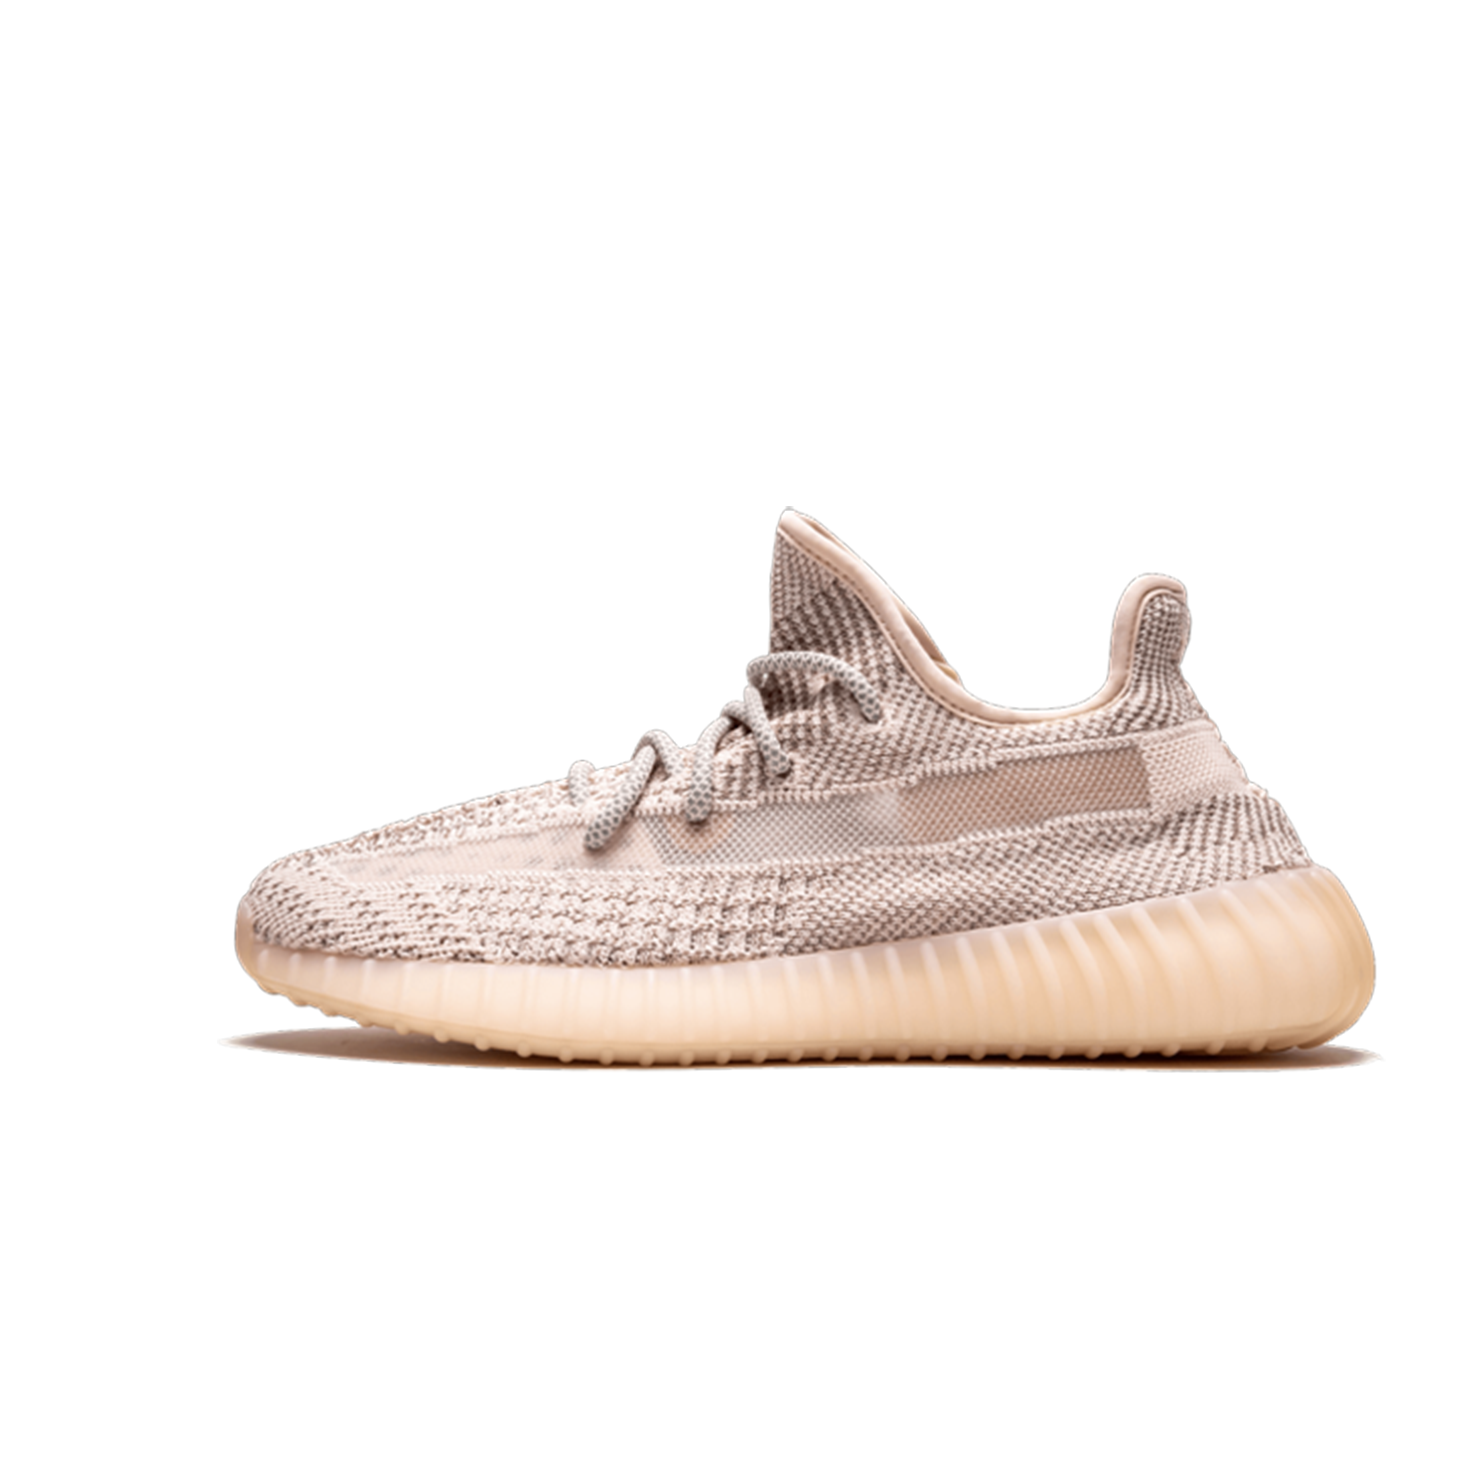 adidas Yeezy Boost 350 V2 Synth Non-Reflective - m.flamsneaker.com